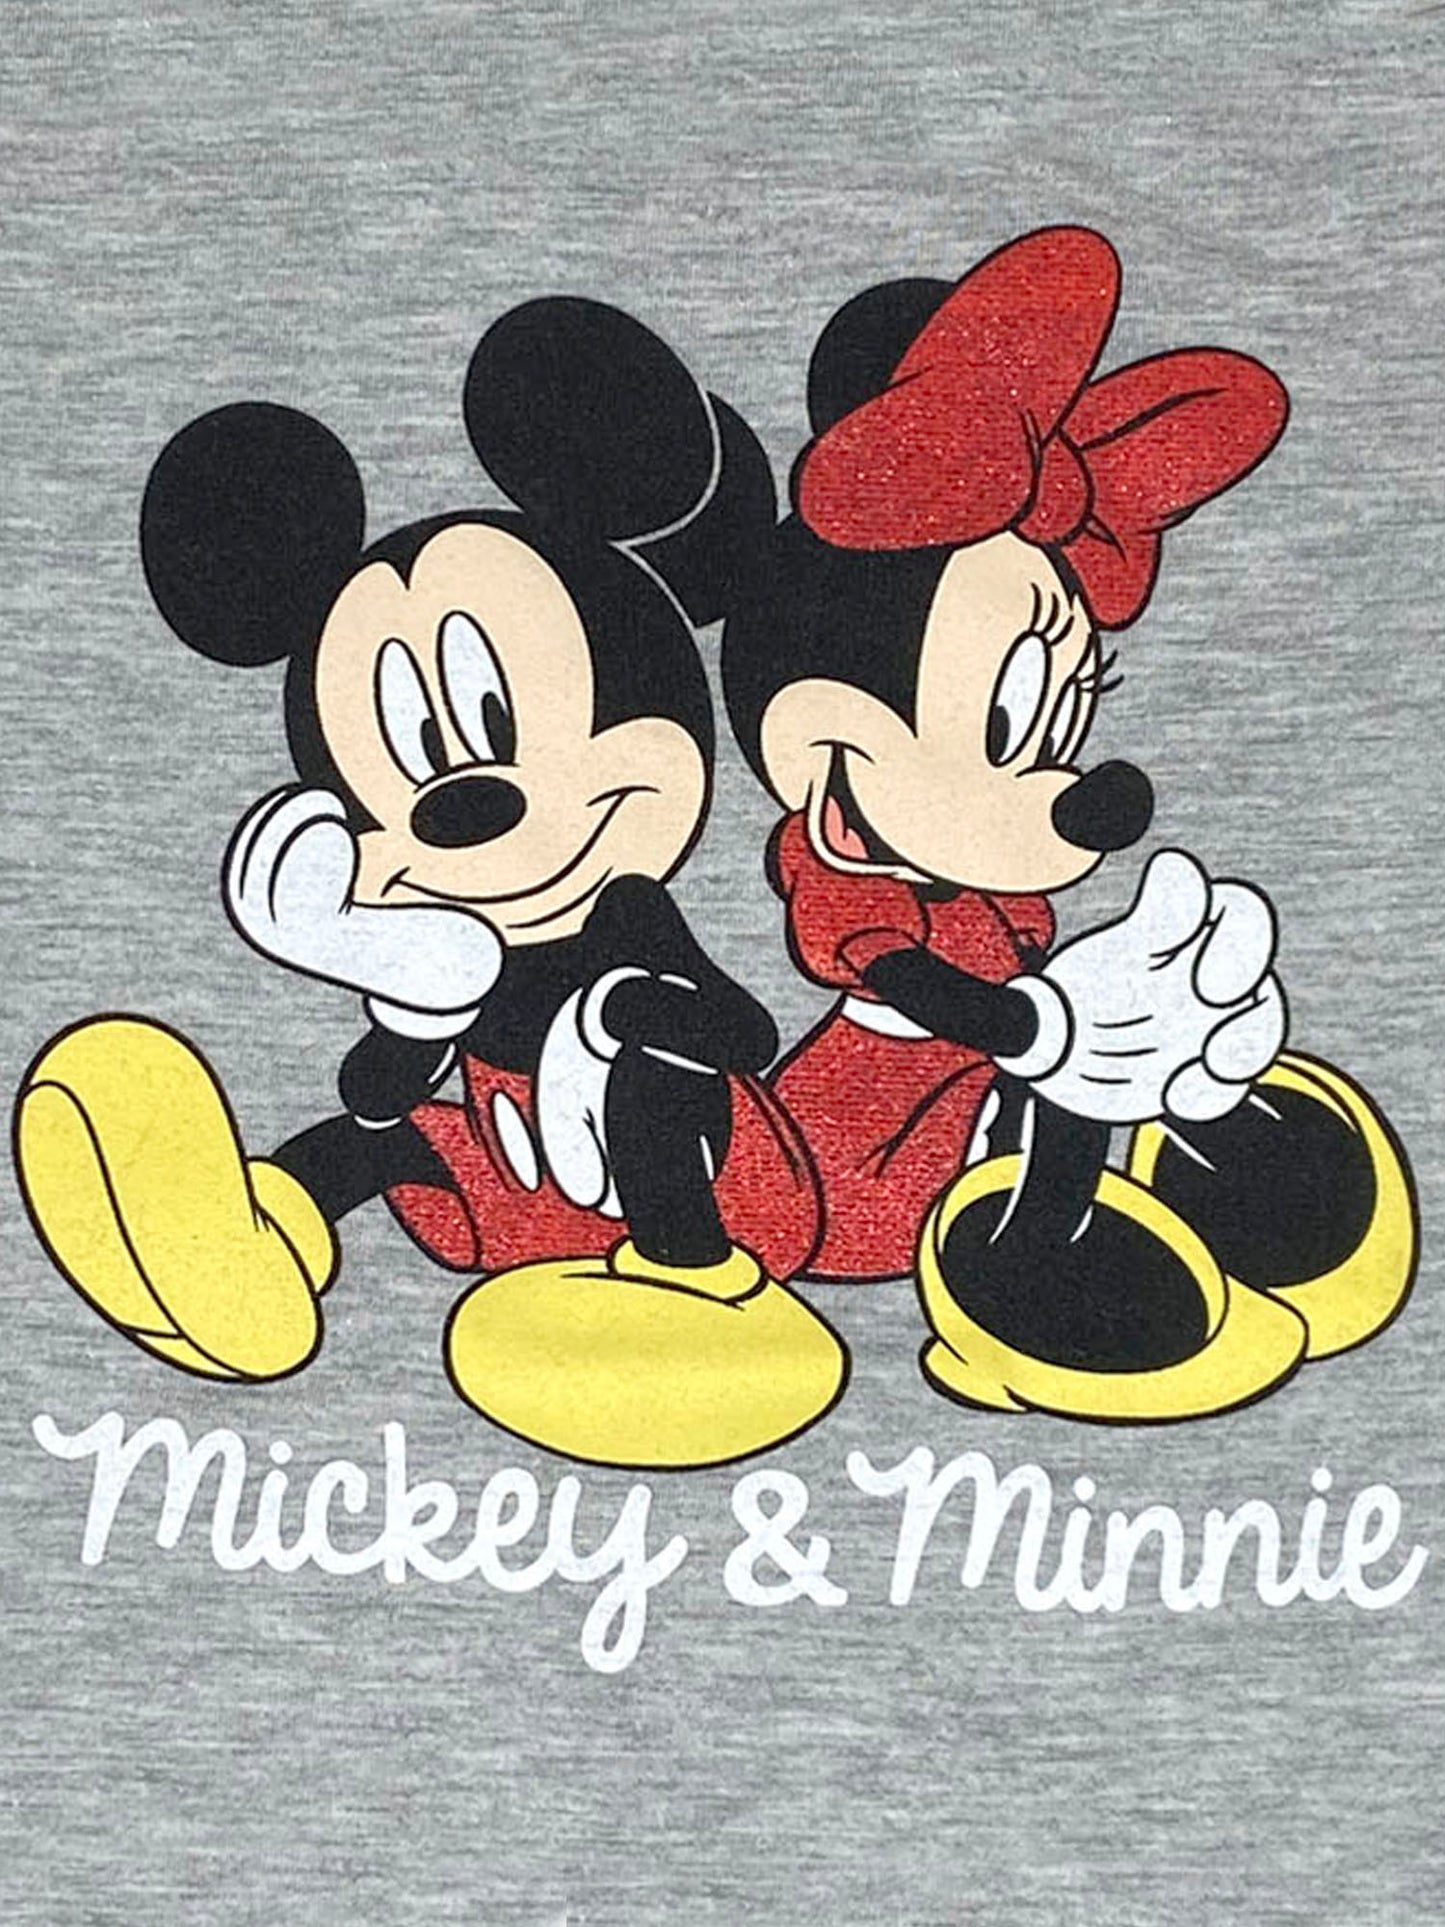 Disney Girls Mickey & Minnie Mouse Cap Sleeves T-Shirt (Extra Small Only)